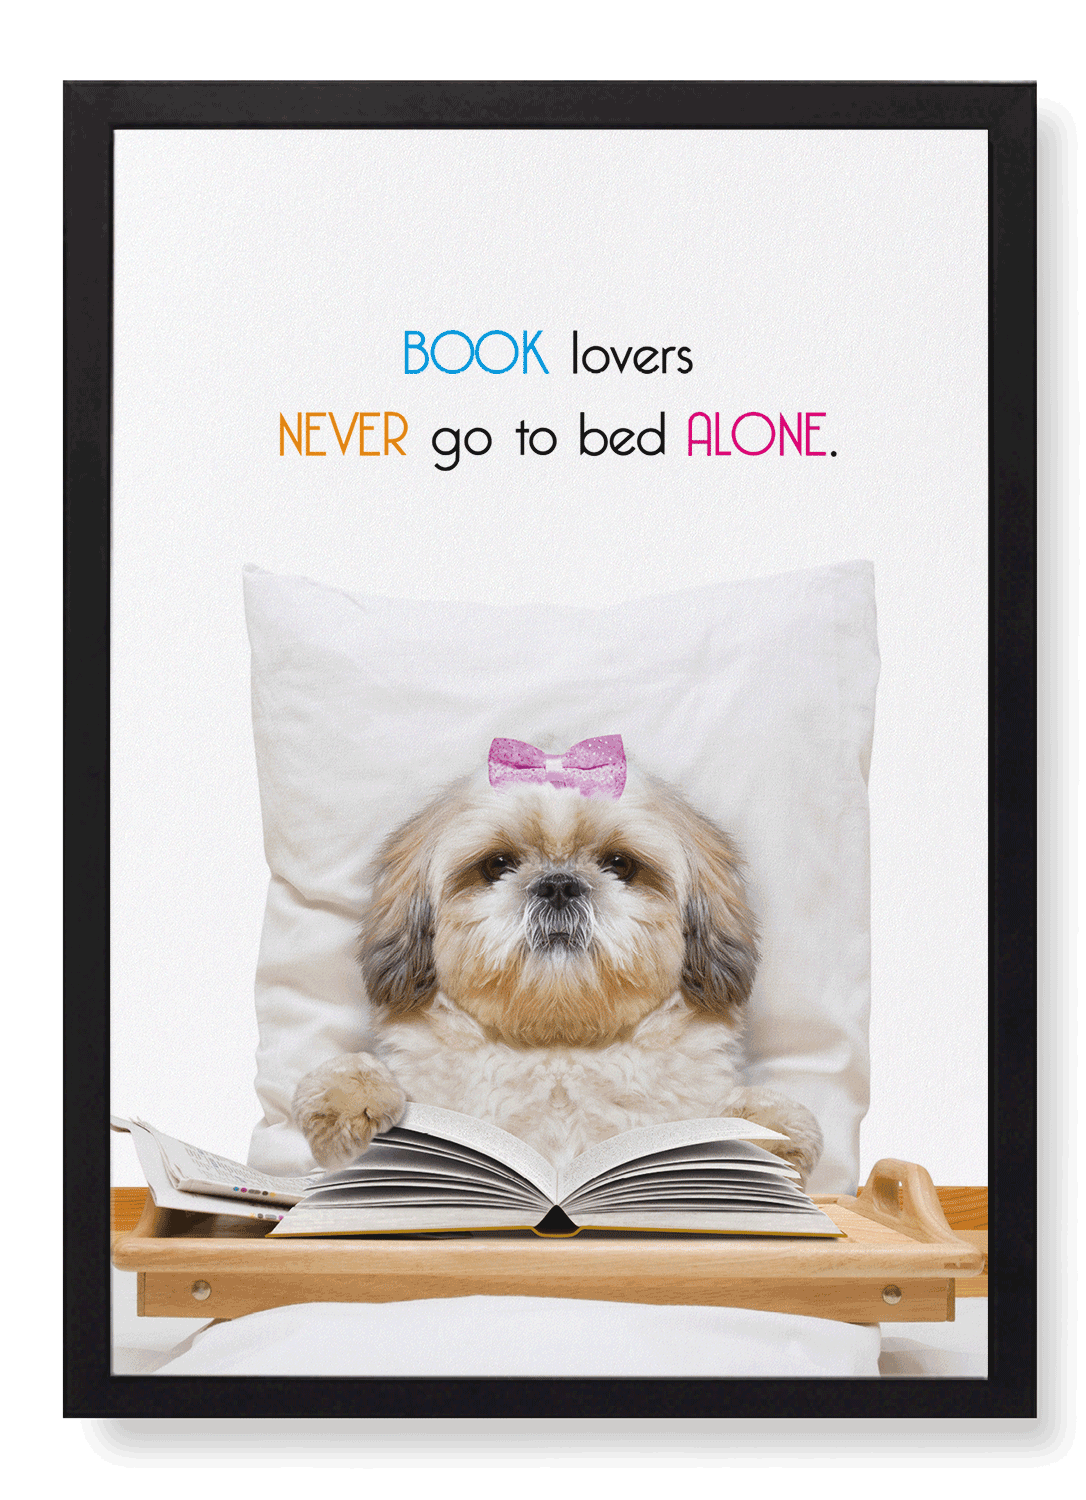 BOOK LOVERS IN BED